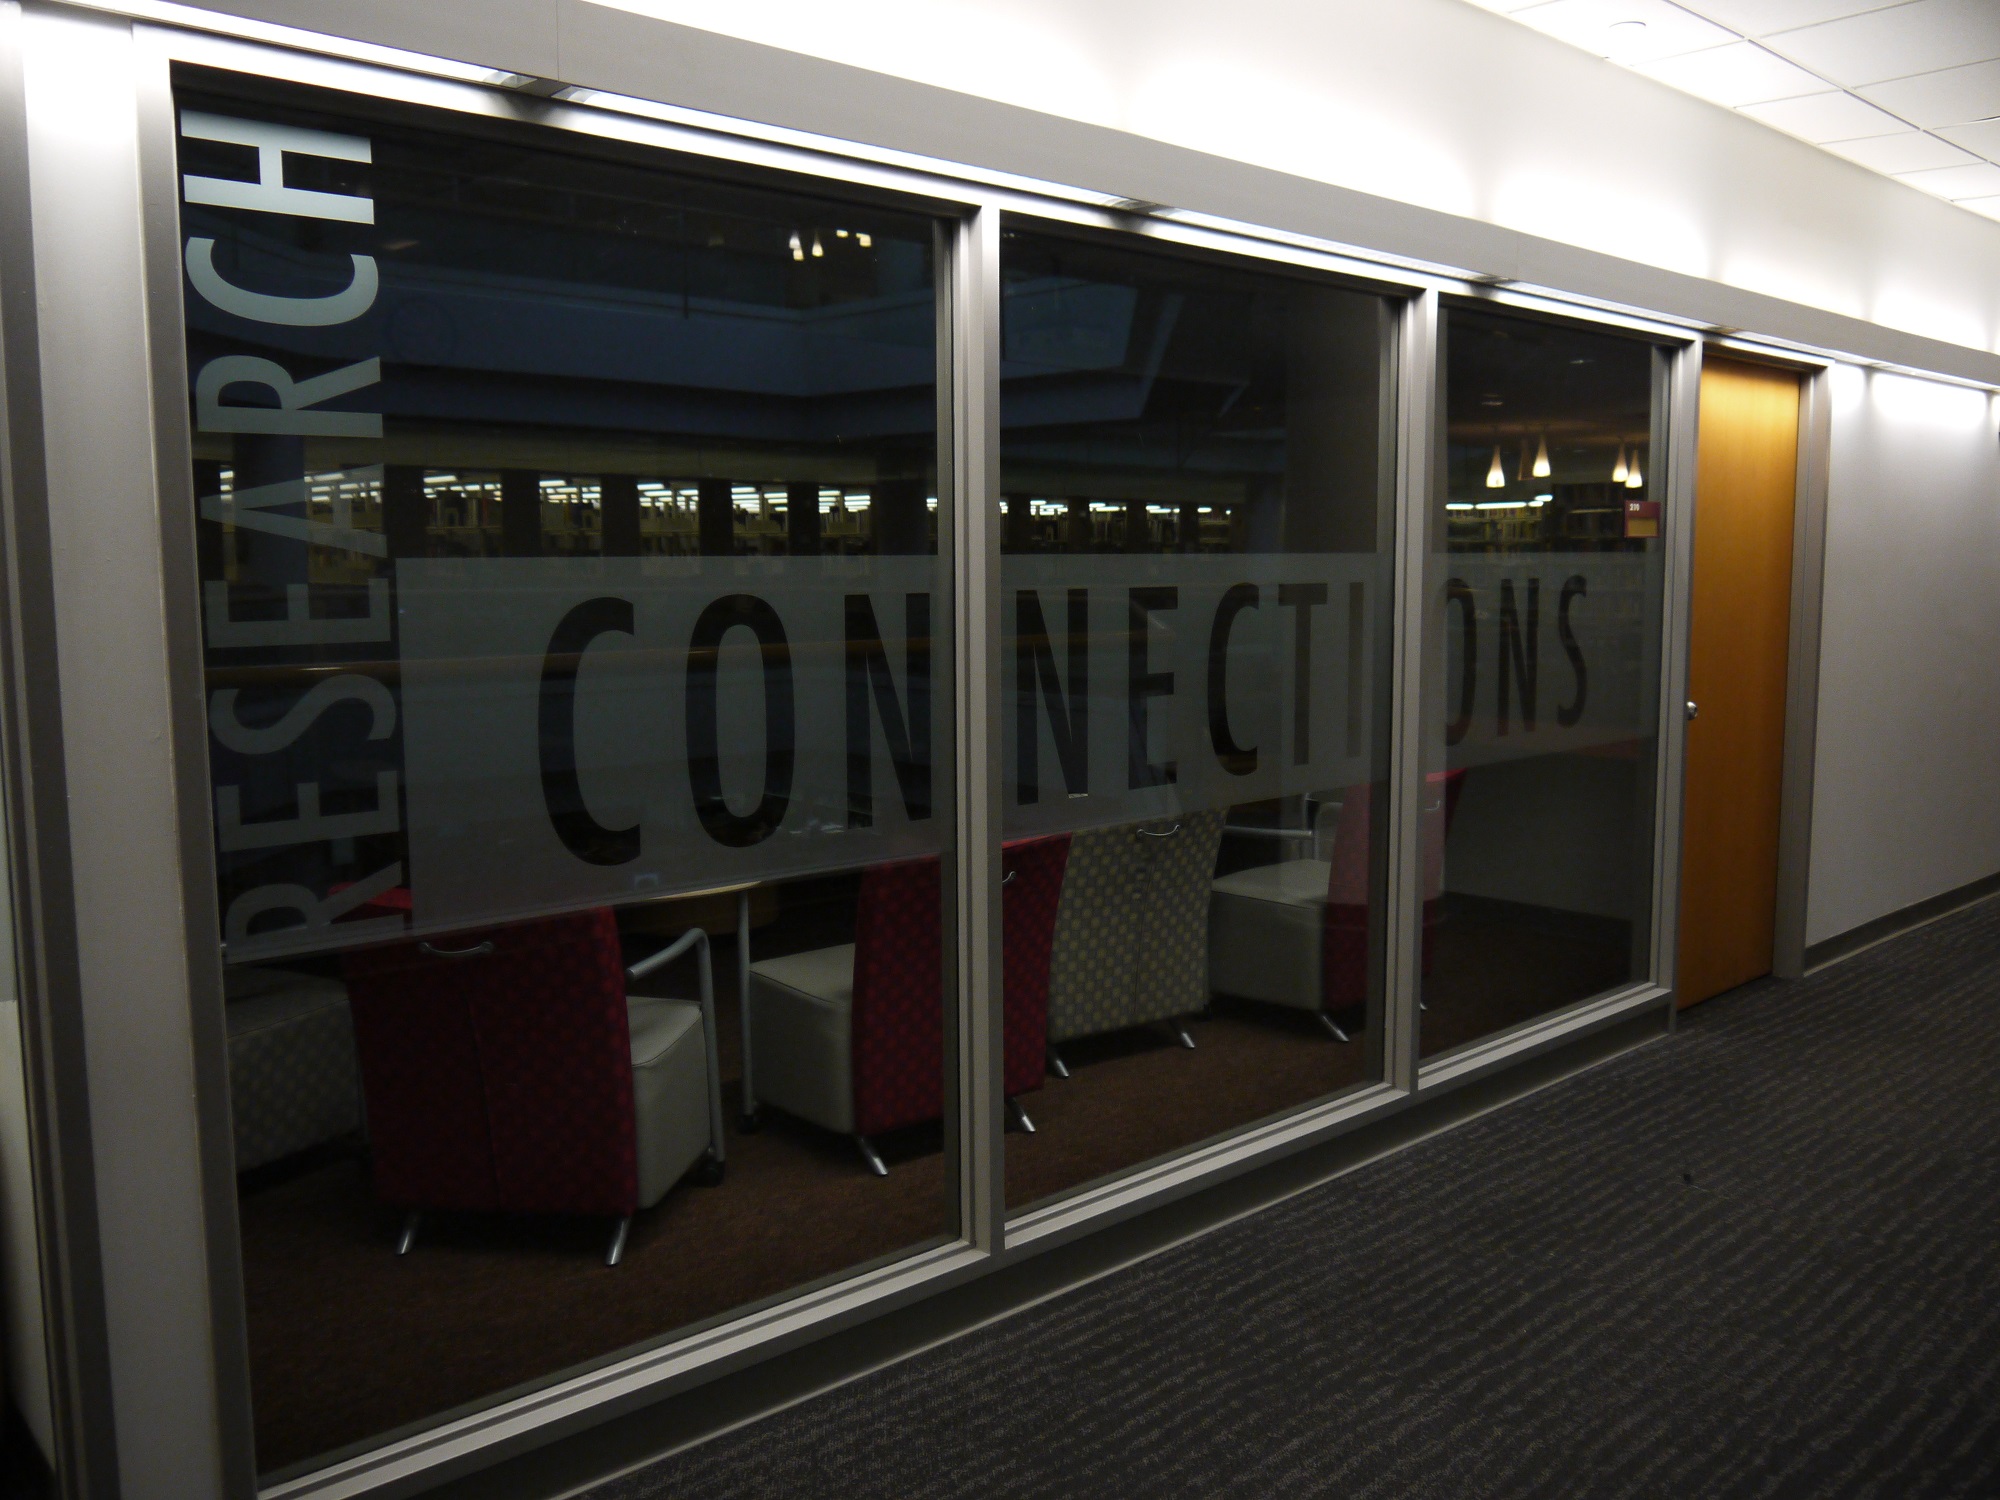 The Research Connections conference room in the W. W. Hagerty Library